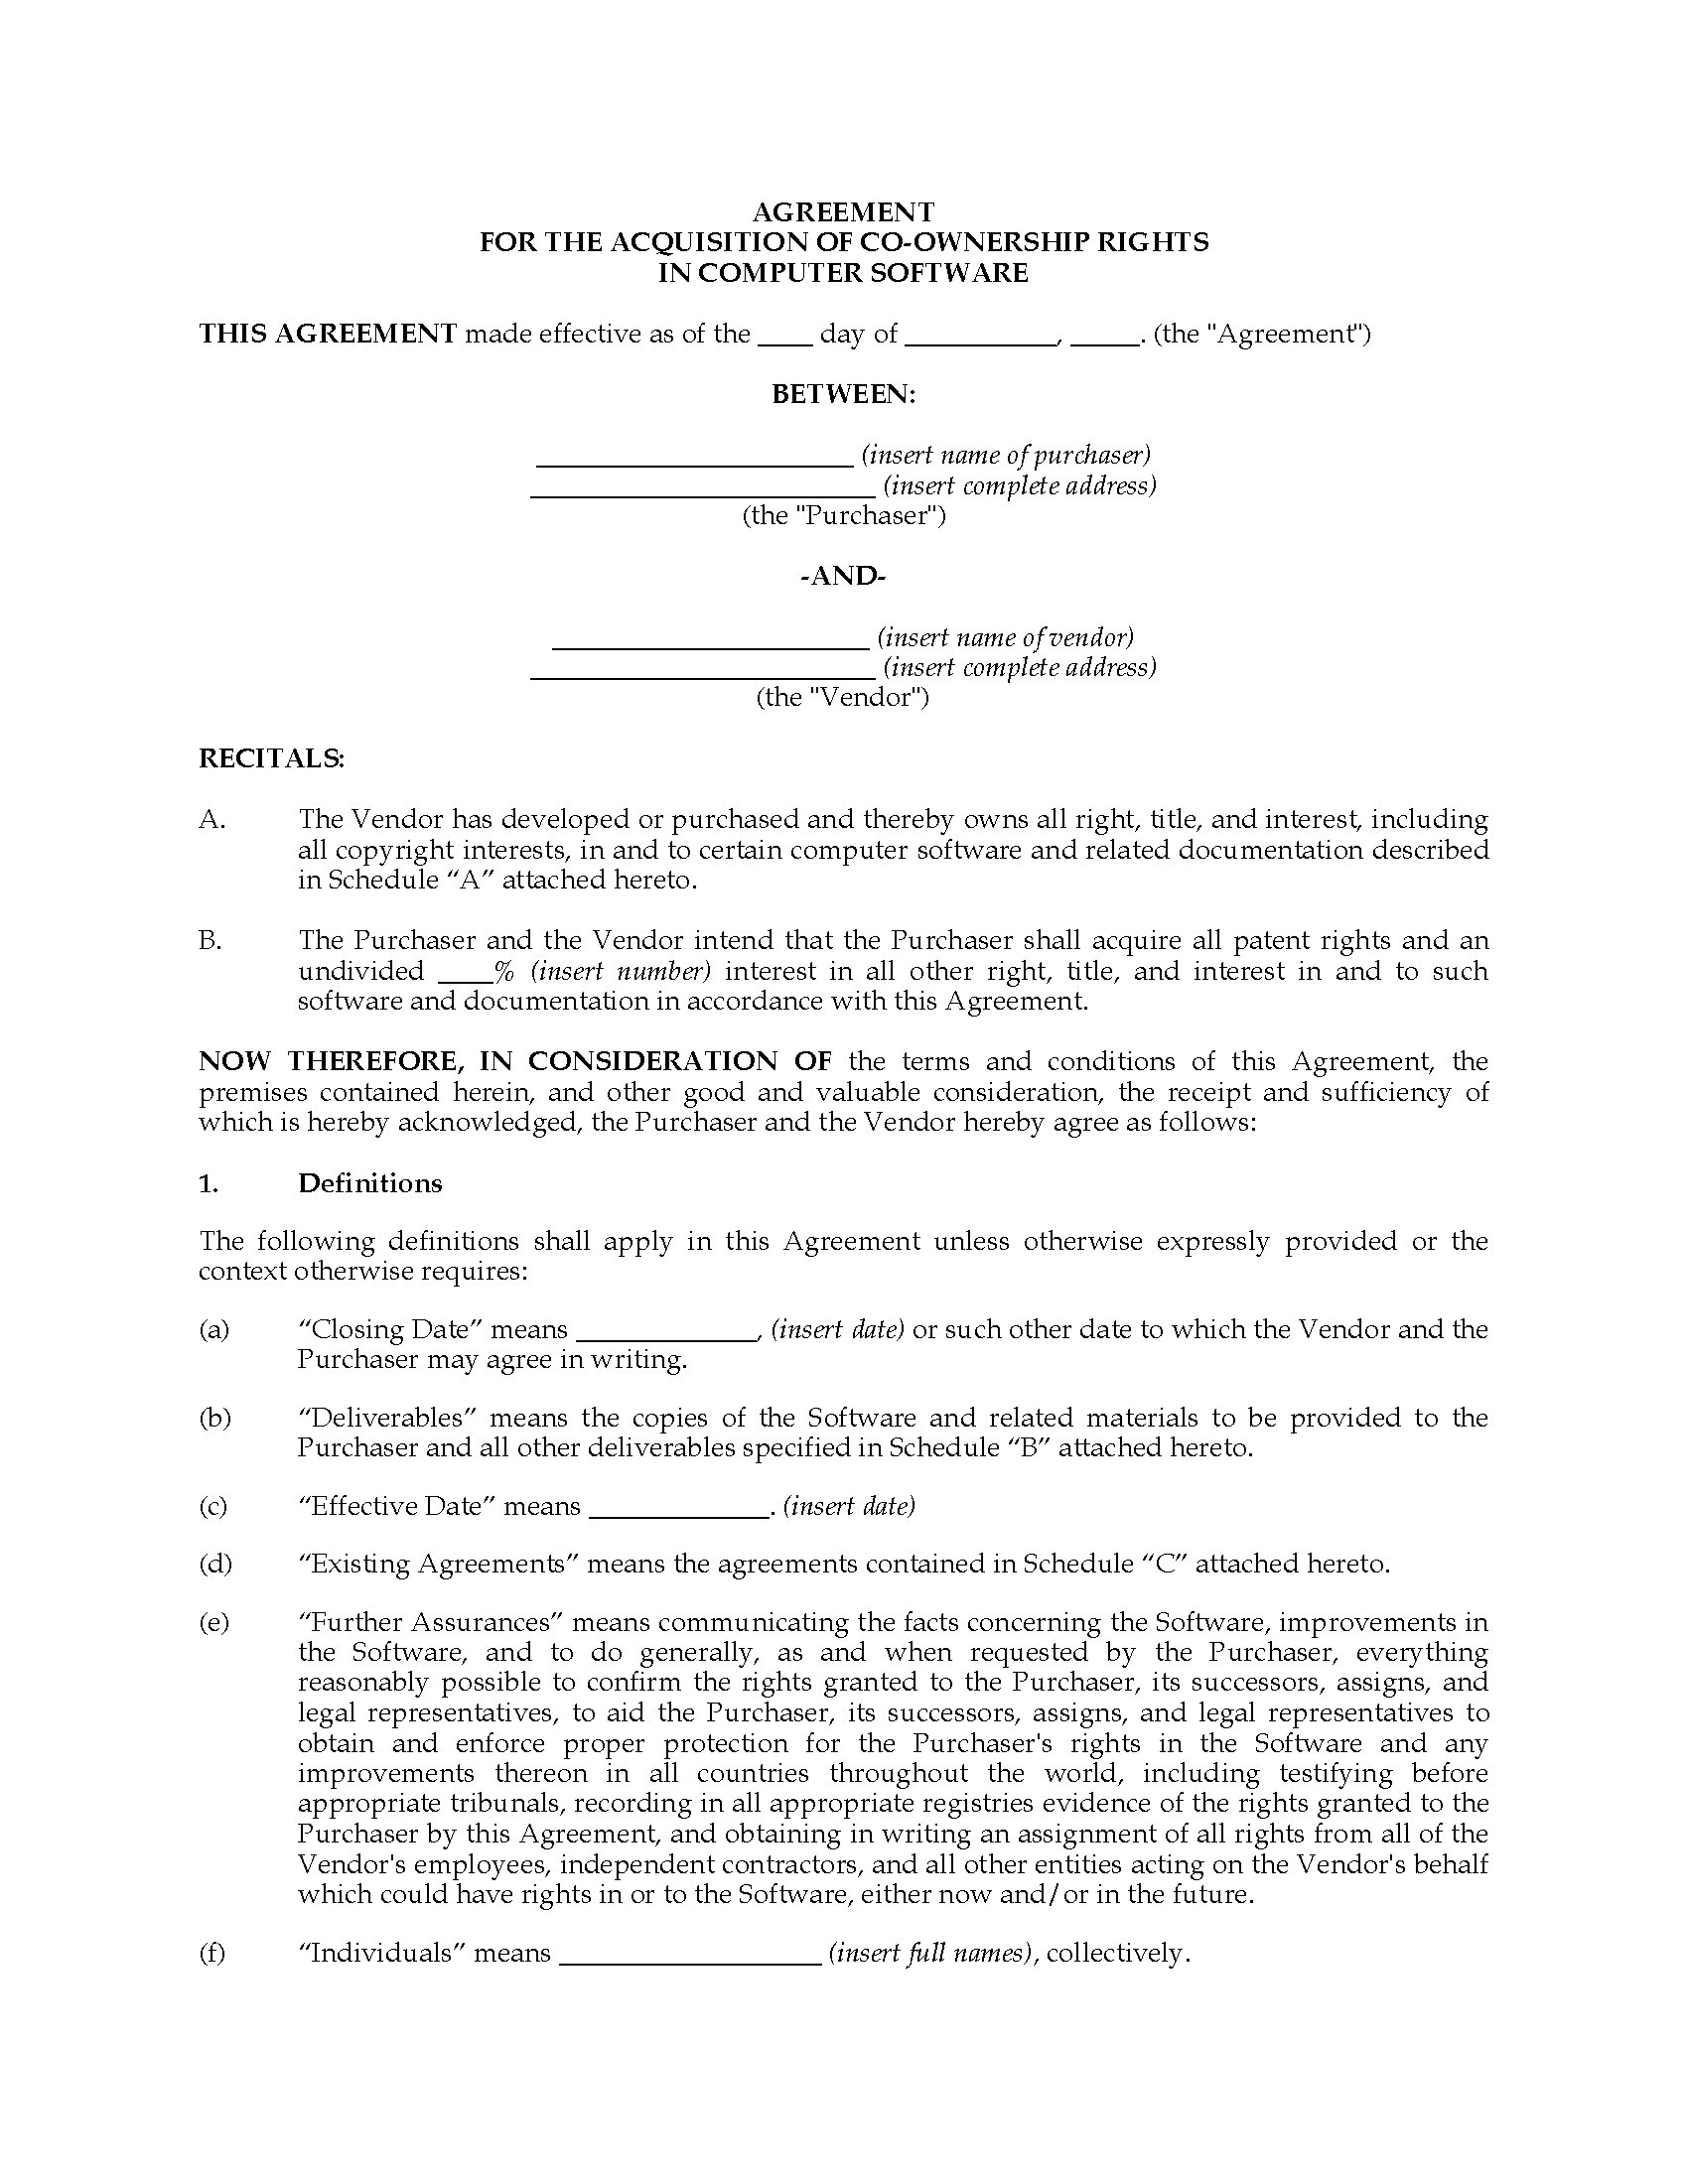 joint-property-ownership-agreement-template